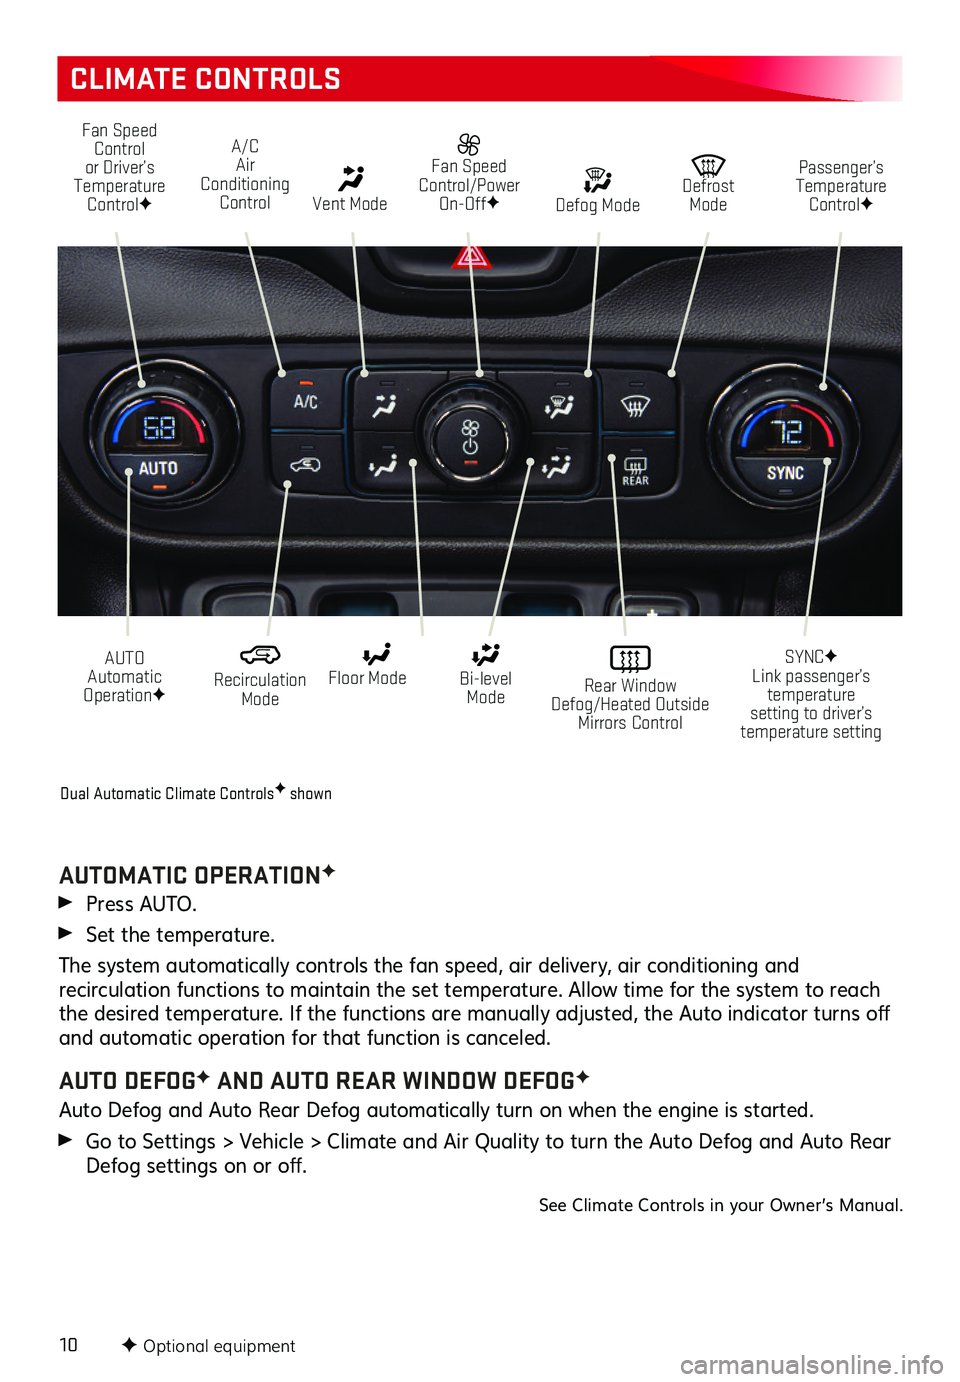 GMC TERRAIN 2020  Get To Know Guide 10
CLIMATE CONTROLS
F Optional equipment
Fan Speed Control or Driver’s Temperature ControlF
A/C Air Conditioning Control   Vent Mode
 Fan Speed Control/Power On-OffF
AUTO  Automatic OperationF
  Rec